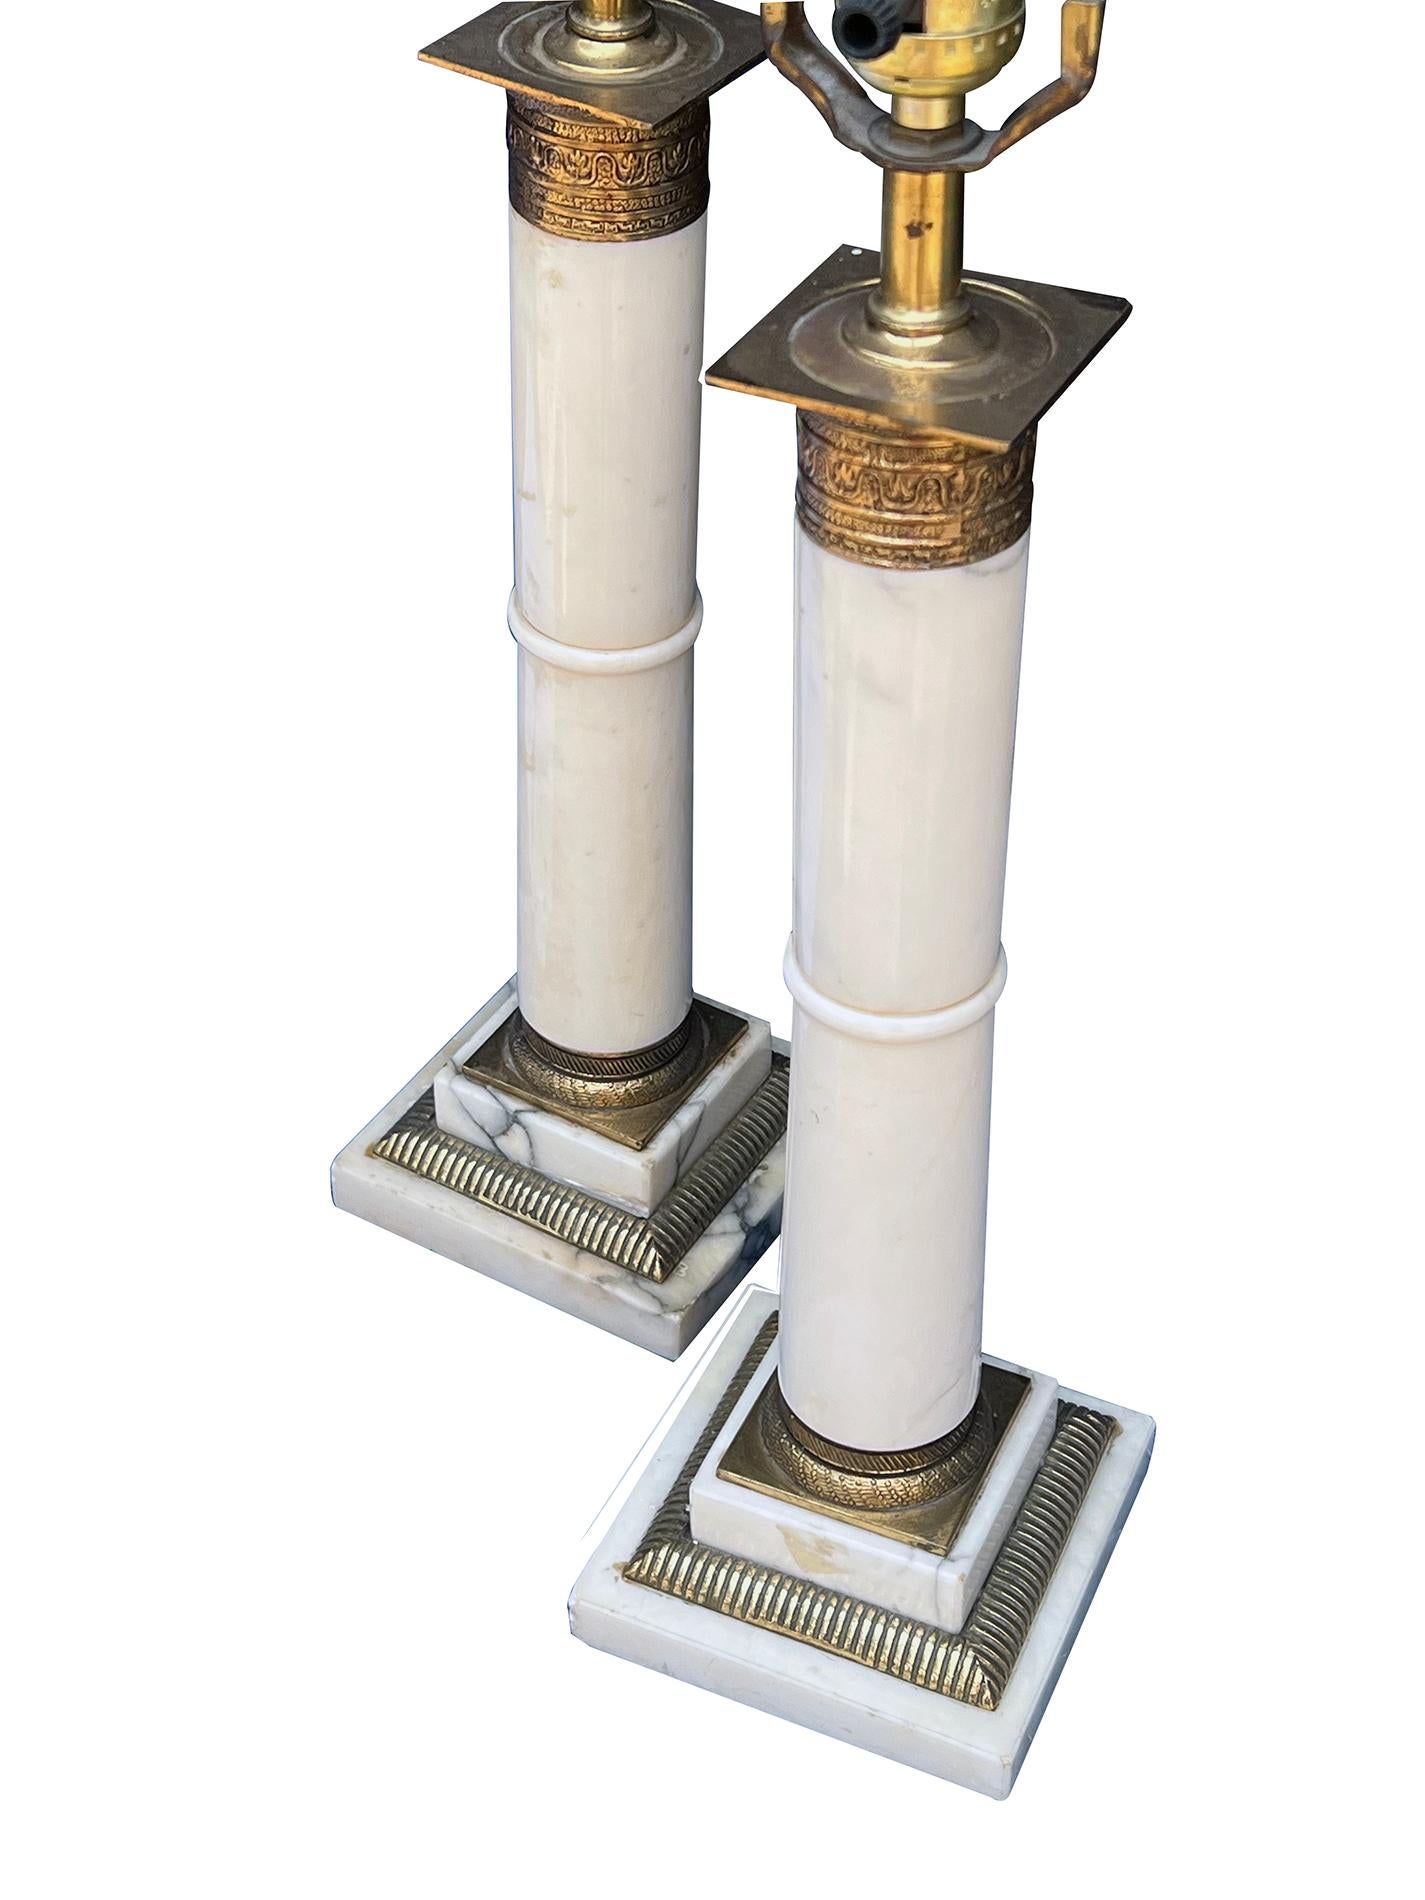 each column of Italian Carrara marble with raised perimeter band all over a stepped base adorned with gilt metal capitals and brass fittings at the base